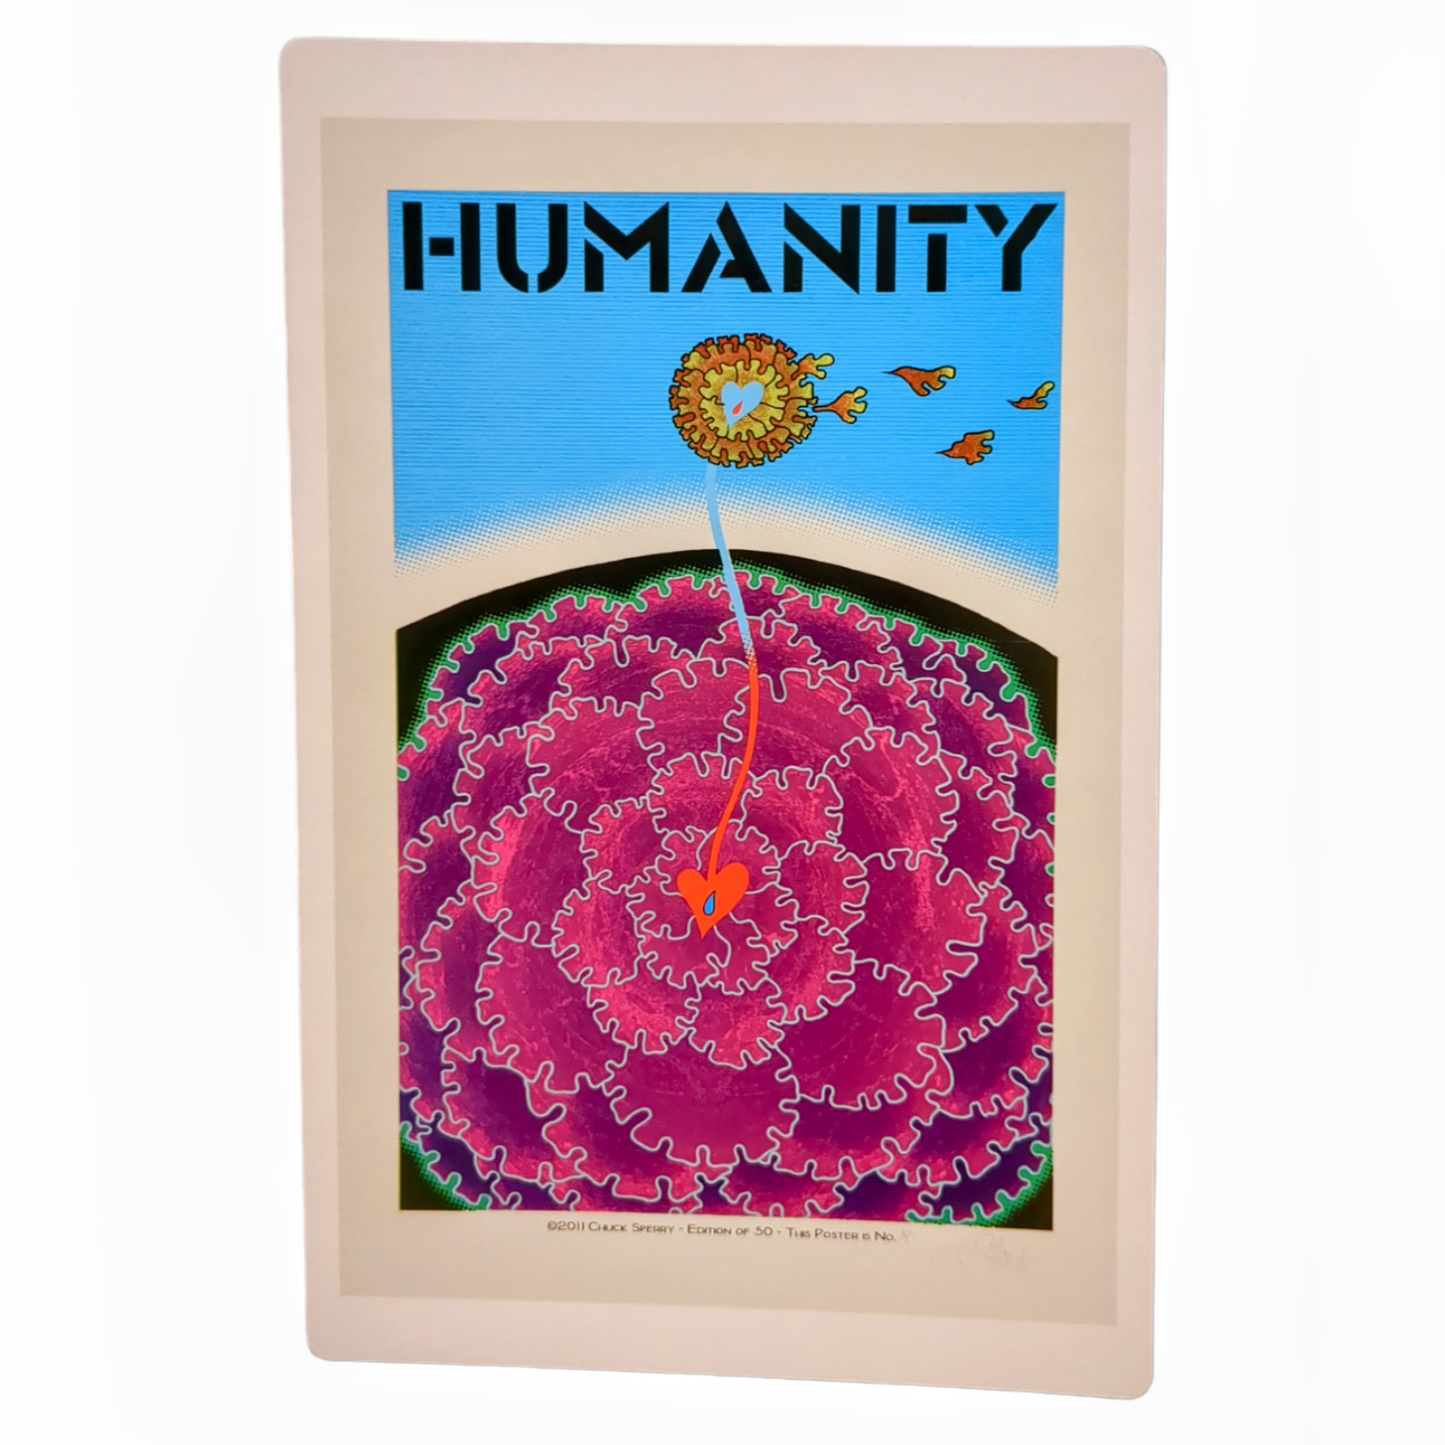 Chuck Sperry Humanity, 2011 Art Card Approx. 8.5 x 5.5 in